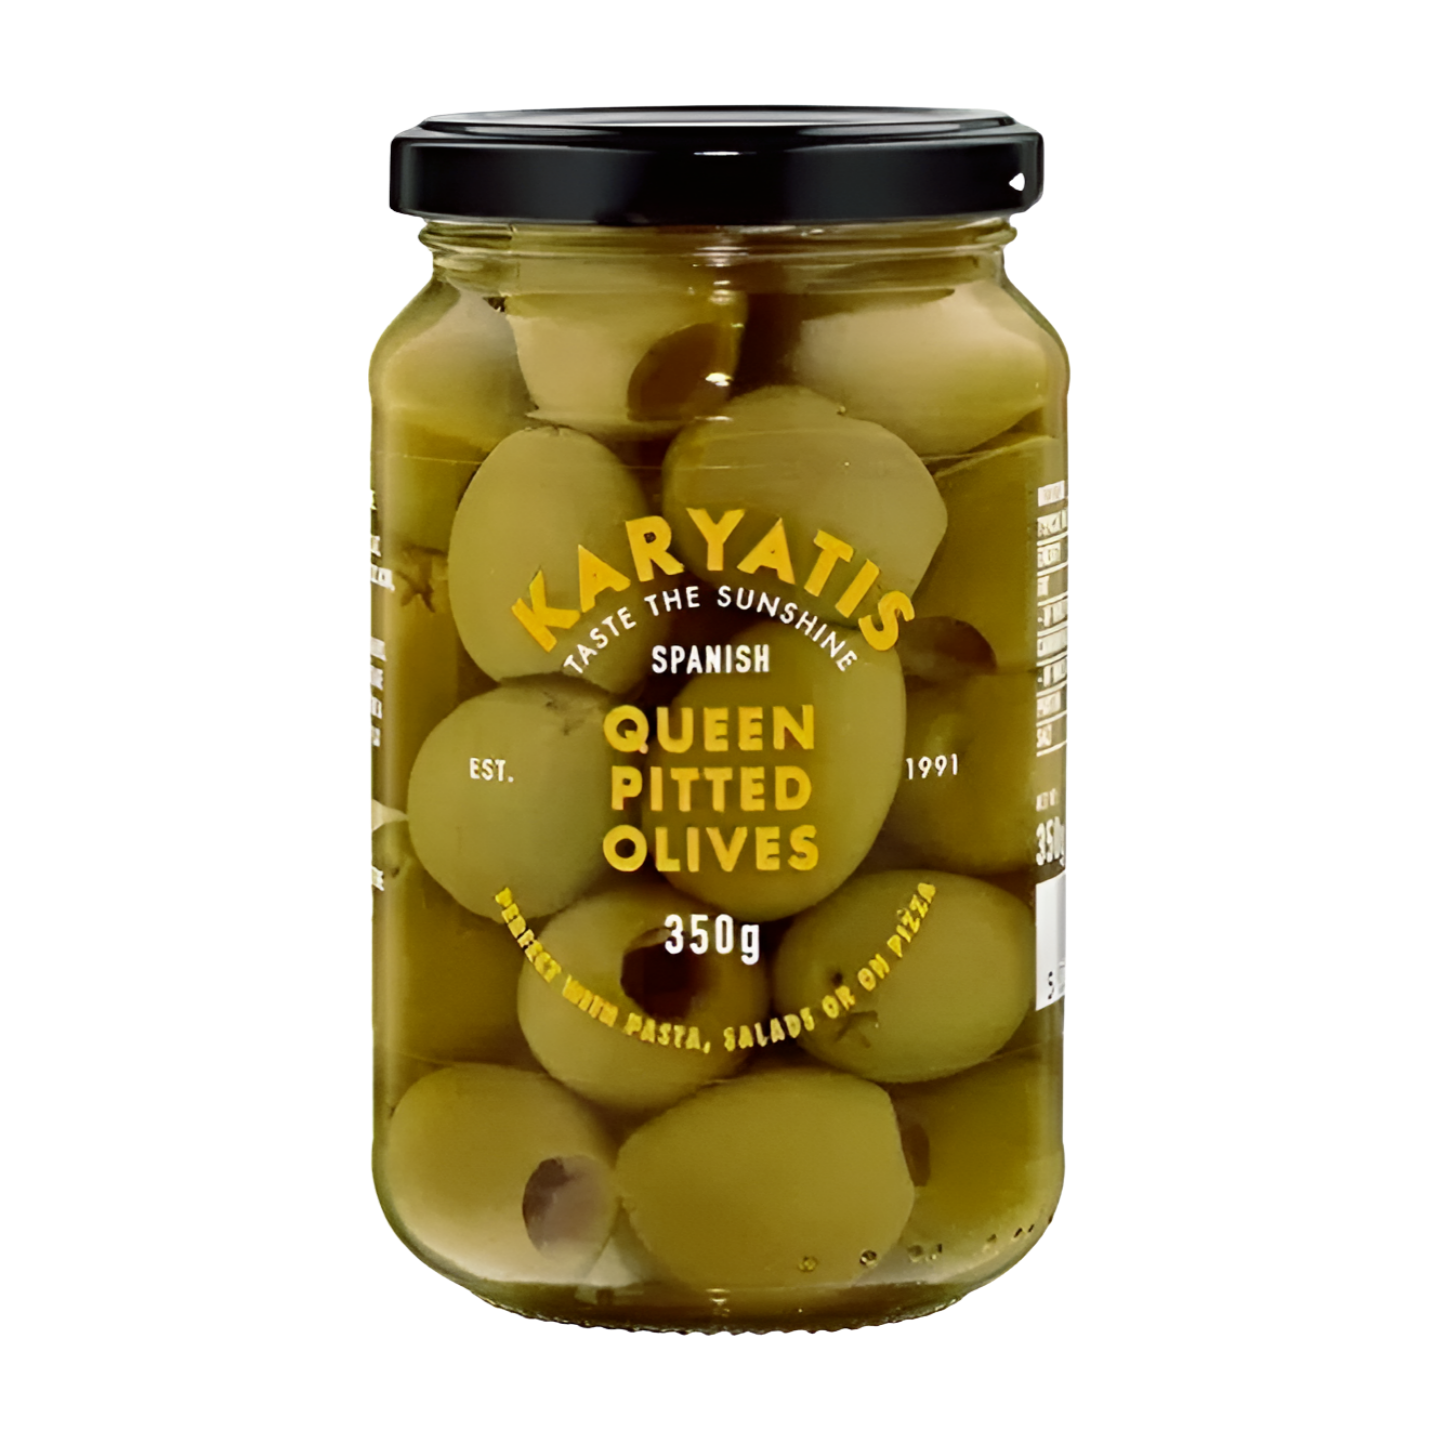 Karyatis Spanish Queen Pitted Olives (6x350g)